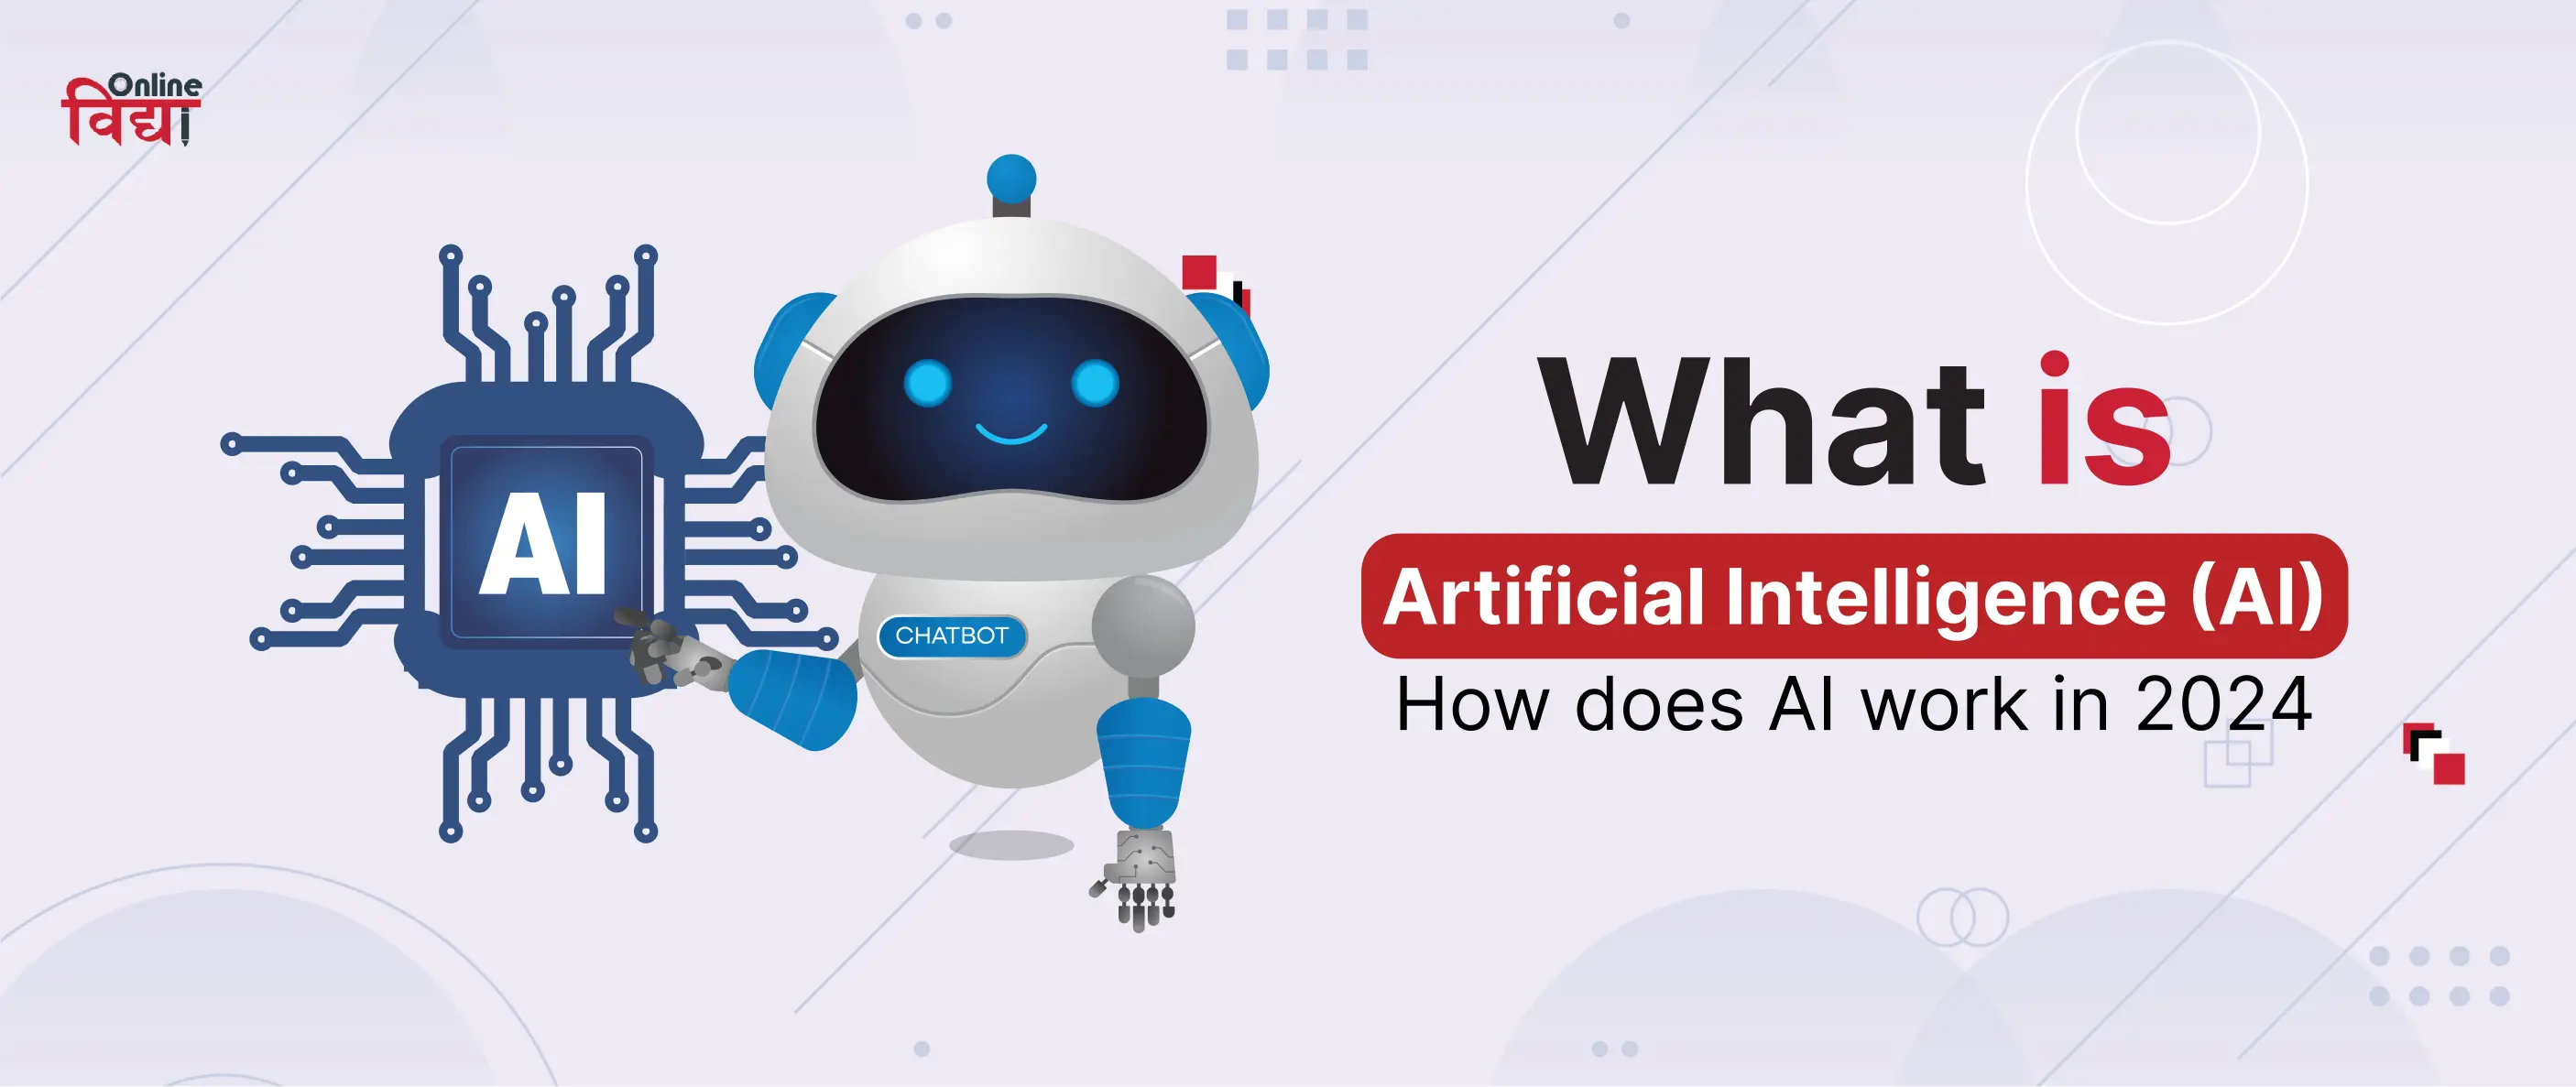 What is Artificial Intelligence (AI) How does AI work in 2024